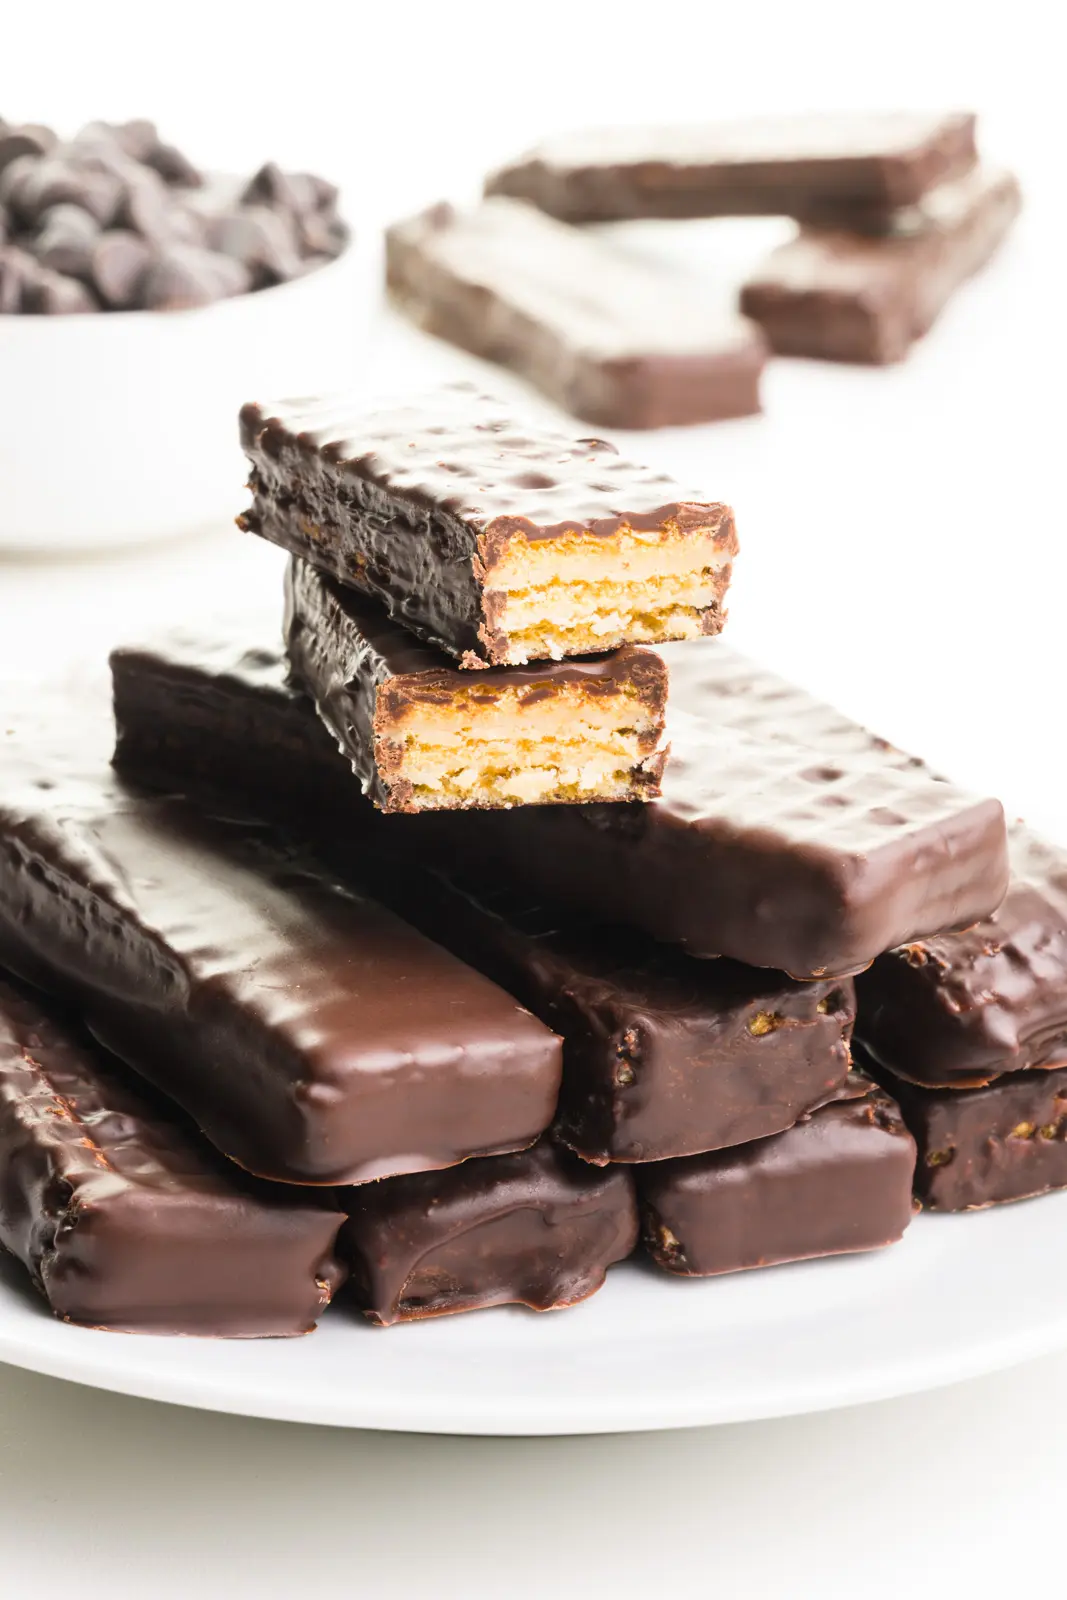 A stack of vegan Kit Kat Bars has two at the top that have been chopped in half, revealing the cookie underneath a chocolate coating. There are chocolate chips and more bars in the background.